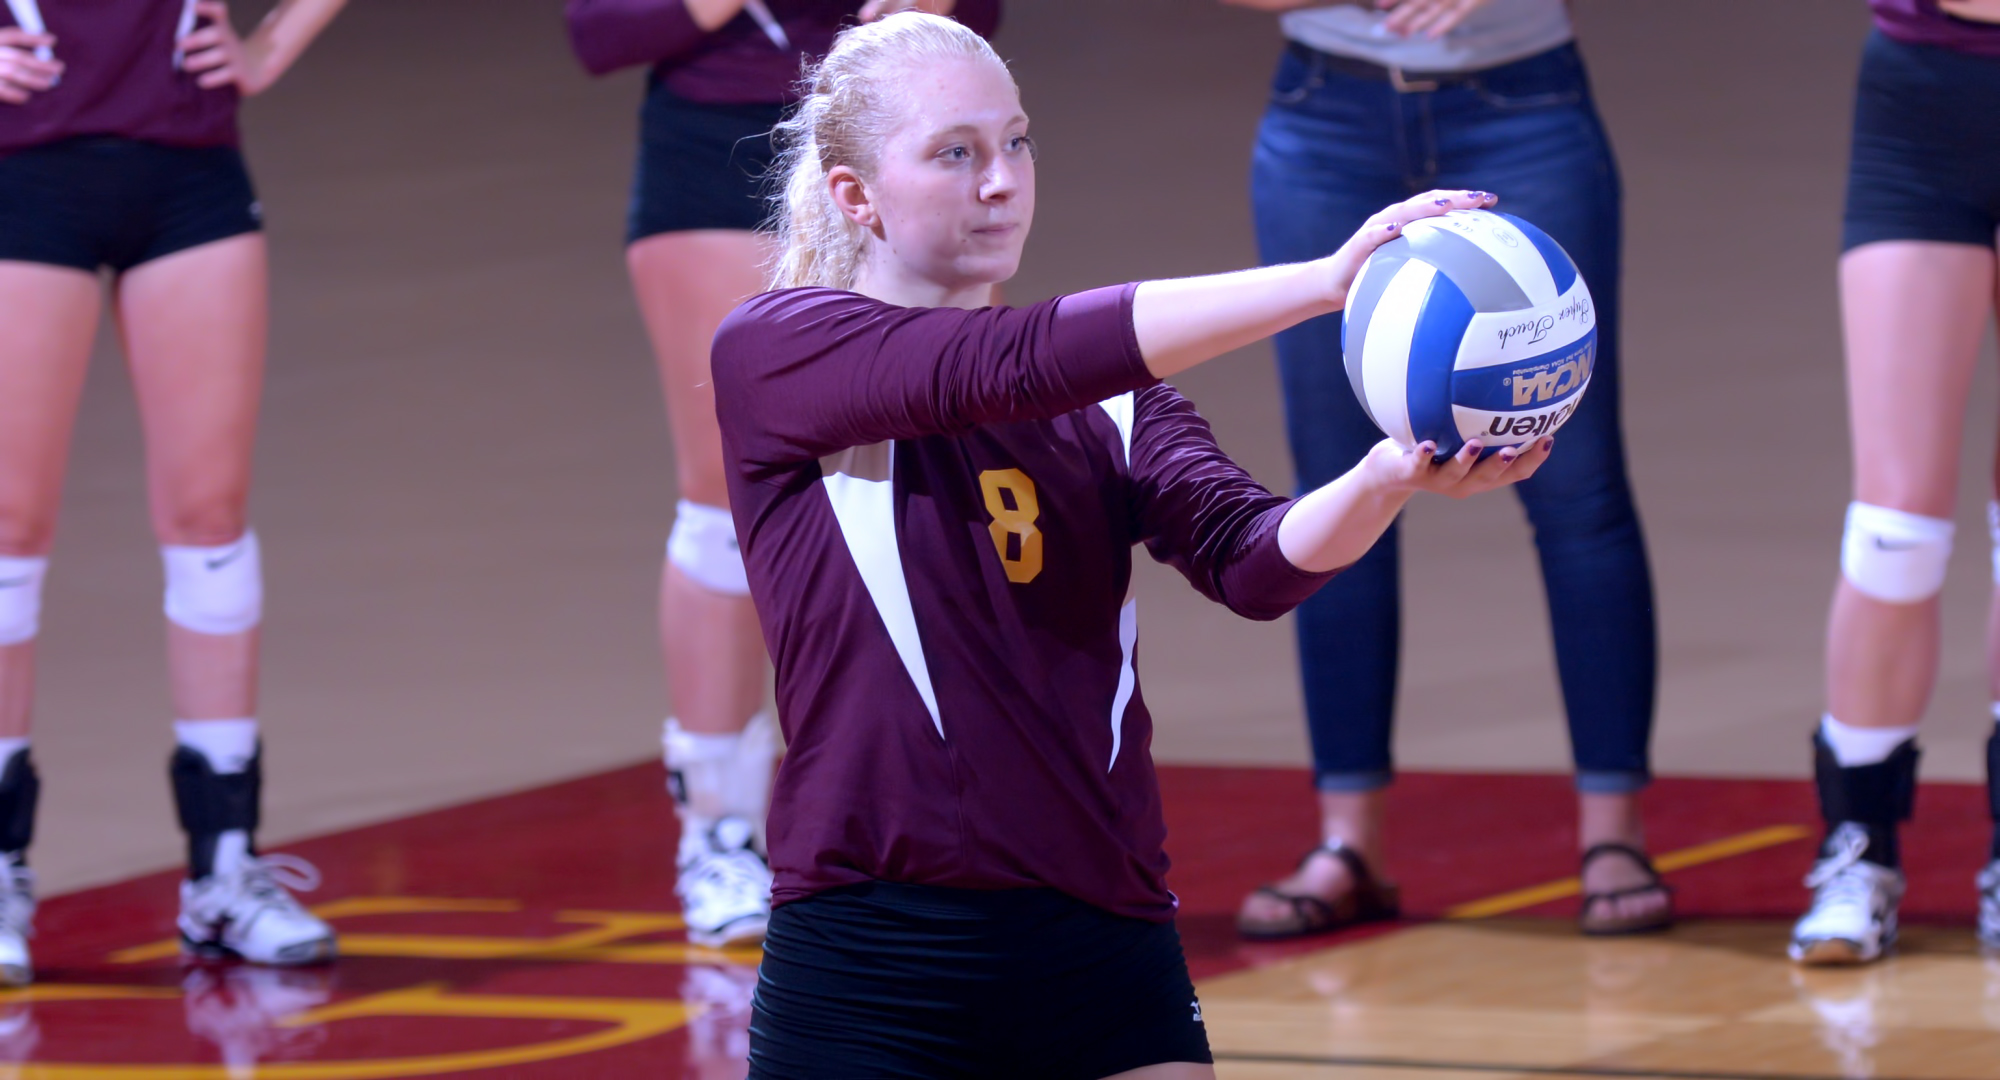 Sophomore Brianna Carney was named to the All-Tournament Team after leading the Cobbers at the season-opening Northwestern Invite.